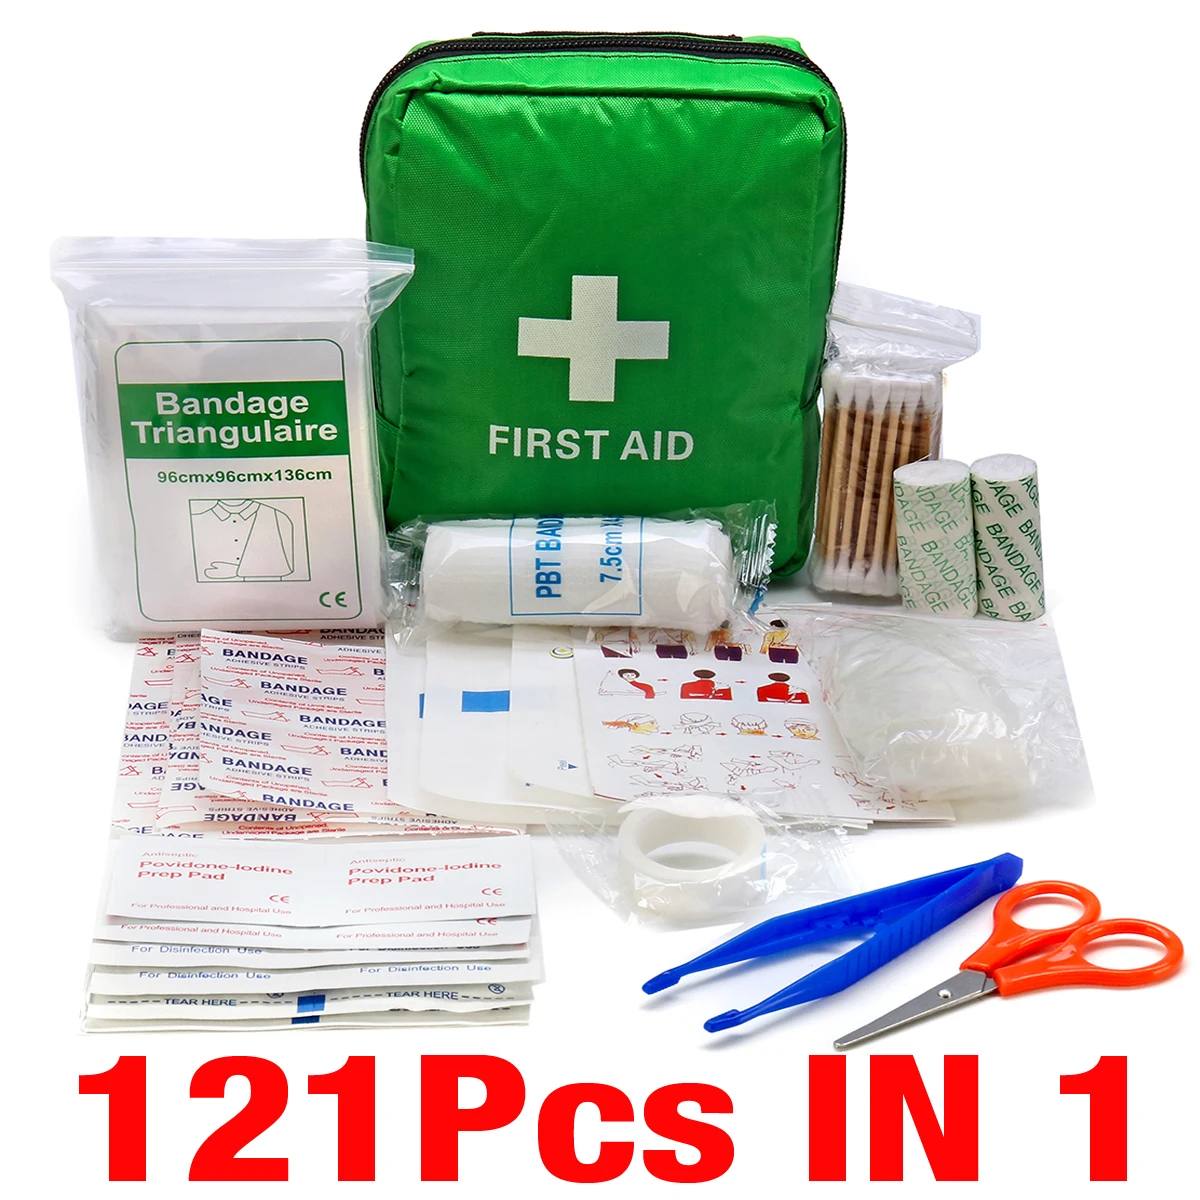 

121Pcs Green Mini Safe Camping Hiking Car First Aid Bag Kit Emergency Kit Treatment Pack Outdoor Wilderness Survival